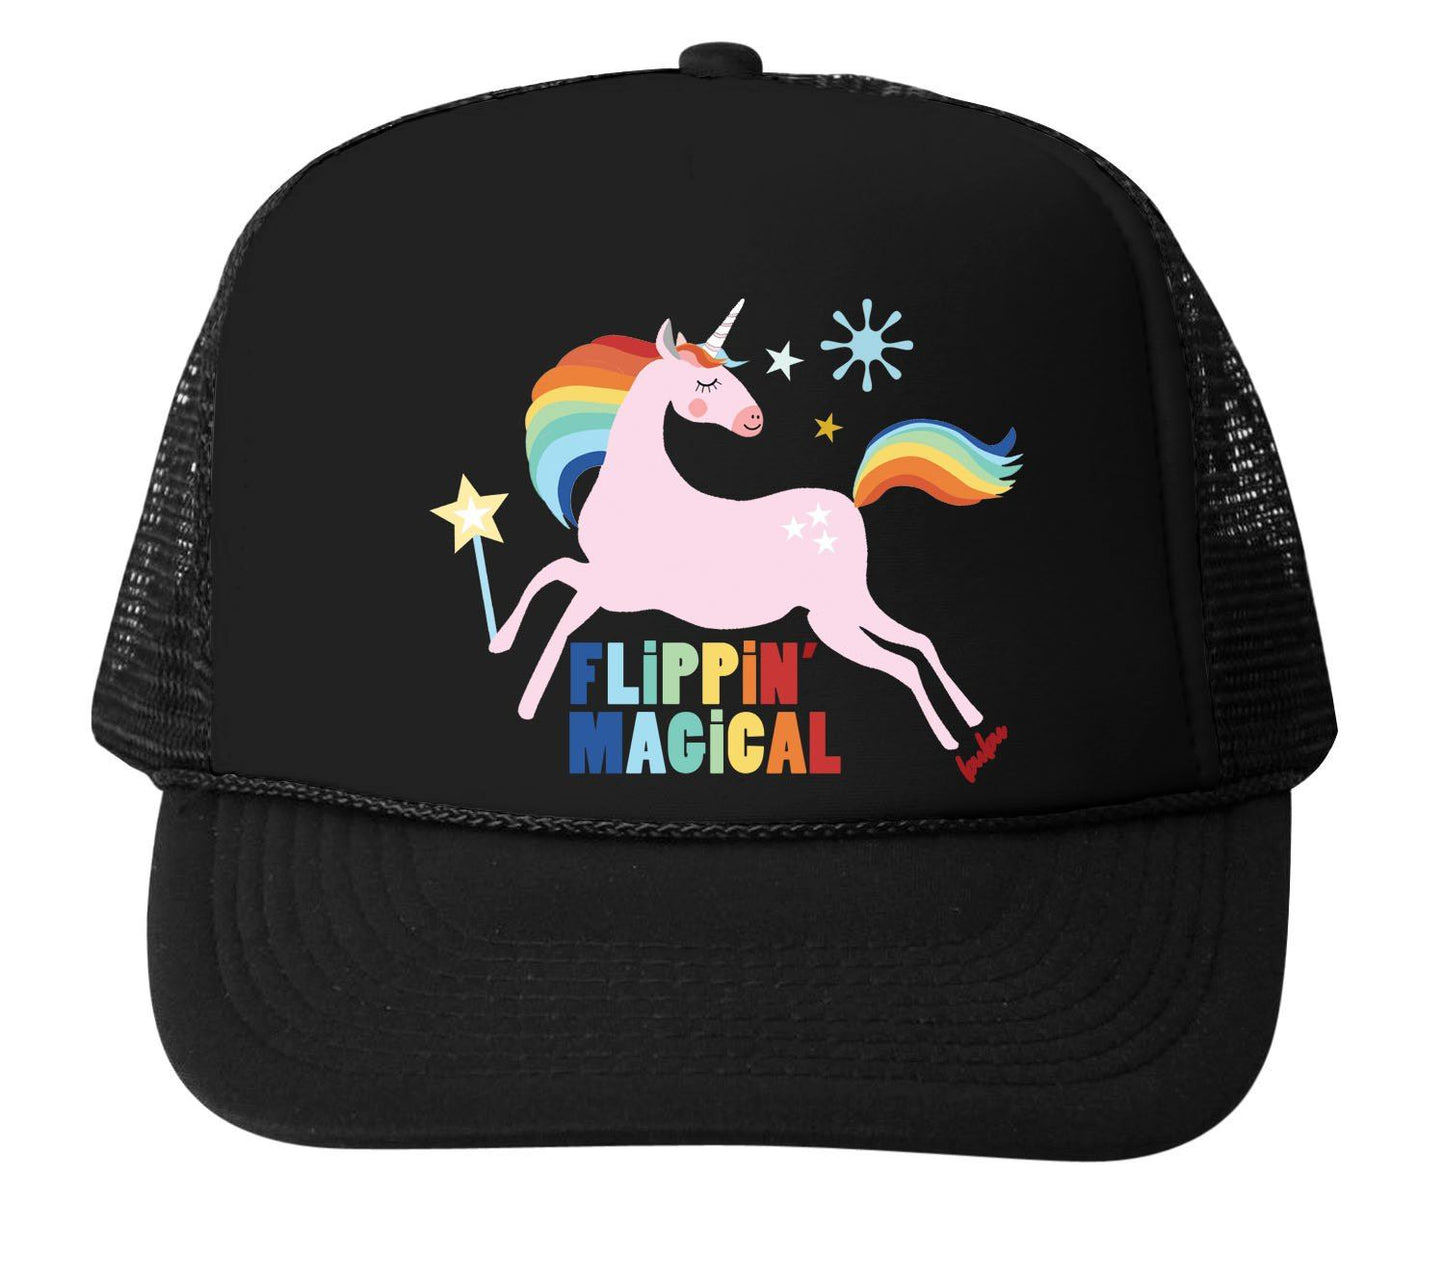 Flippin Magical Trucker Hat - White/Hot Pink Tea for Three: A Children's Boutique